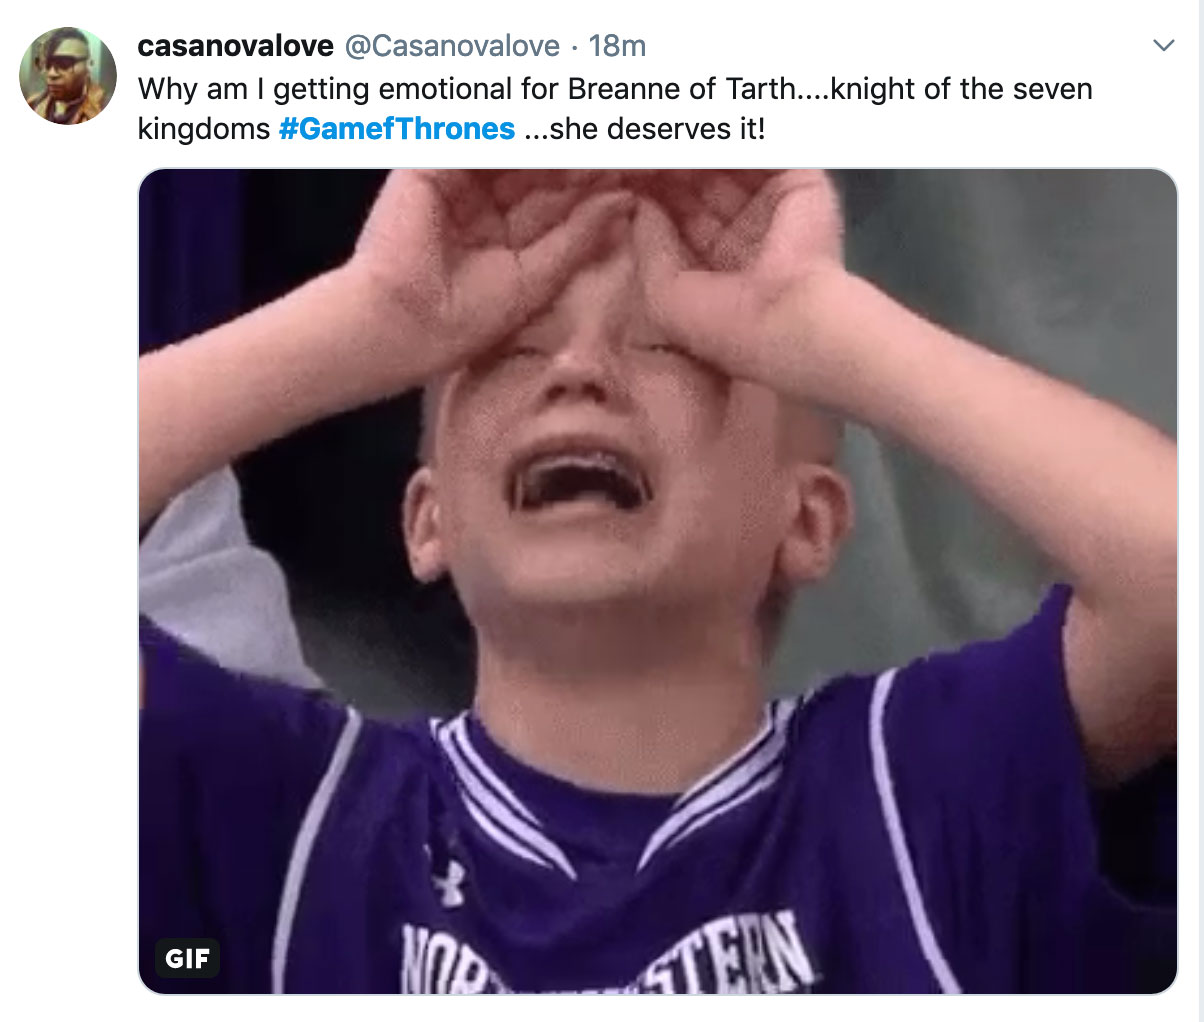 Game of Thrones Season 8 Episode 2 Meme - Kid crying and the text 'why am i getting emotional for Breanne of Tarth... knight of the seven kingdoms'